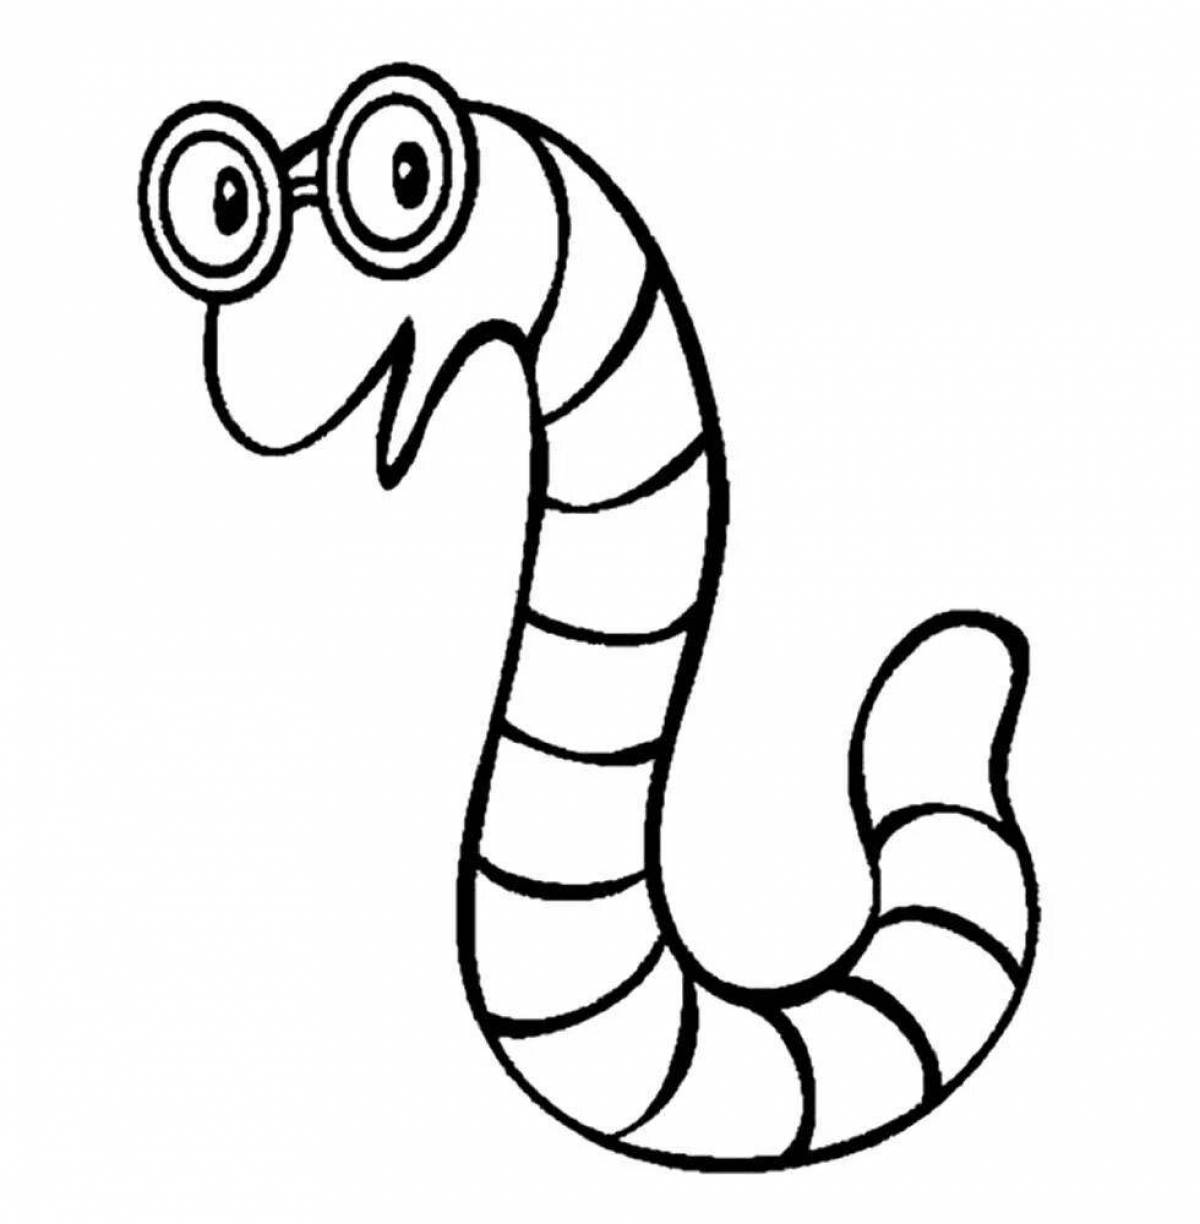 Artistic worm coloring book